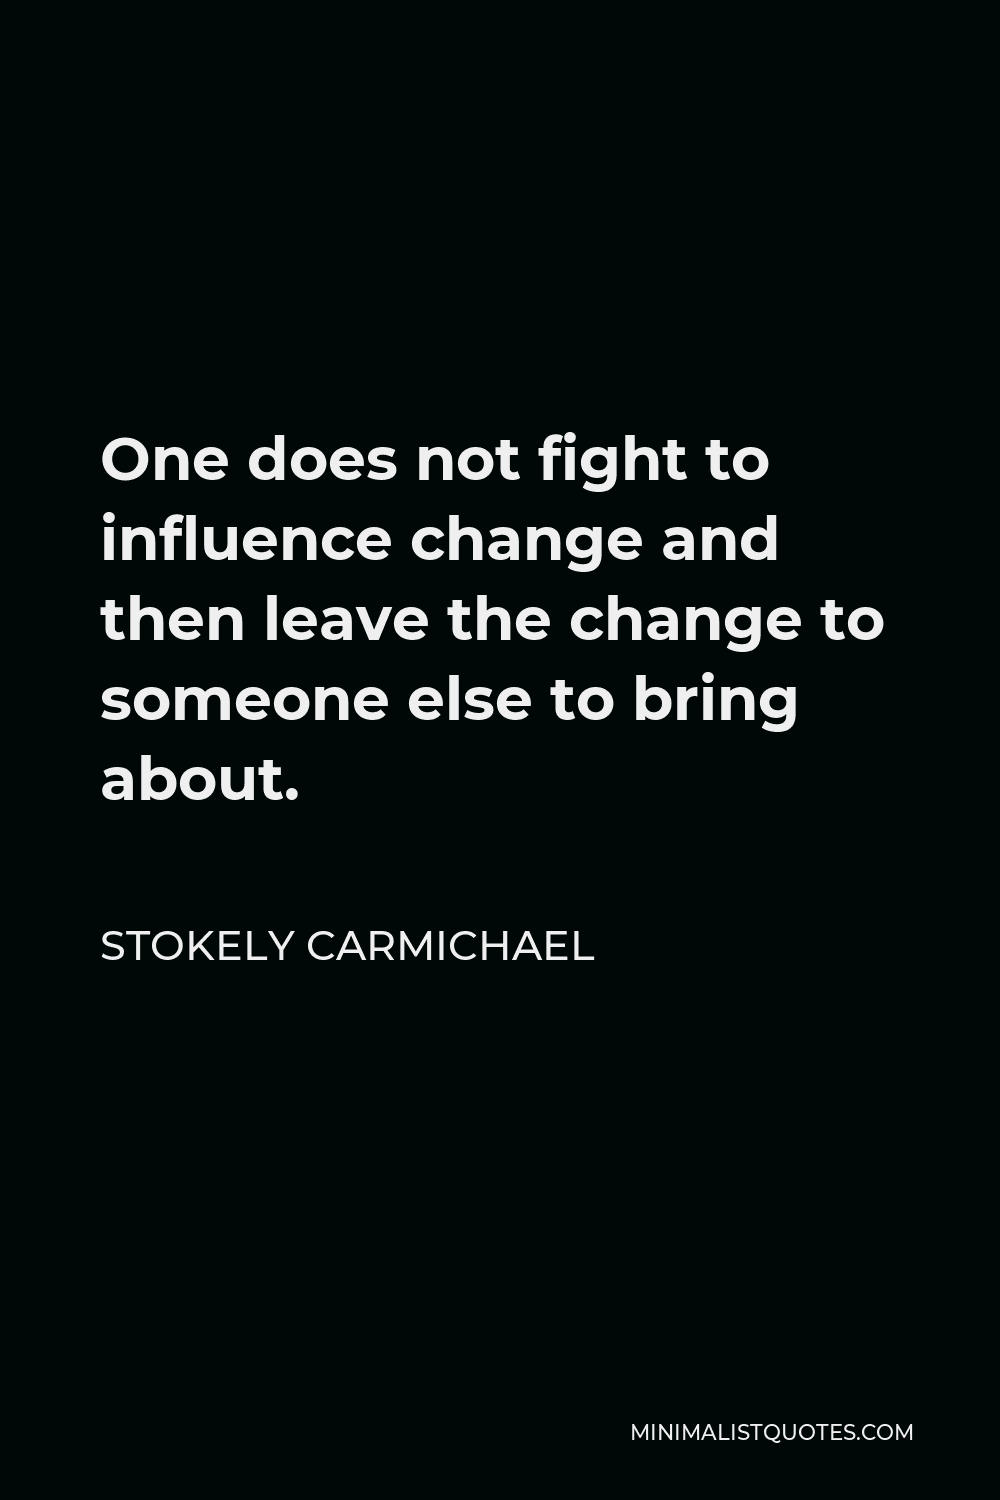 Stokely Carmichael Quote - One does not fight to influence change and then leave the change to someone else to bring about.